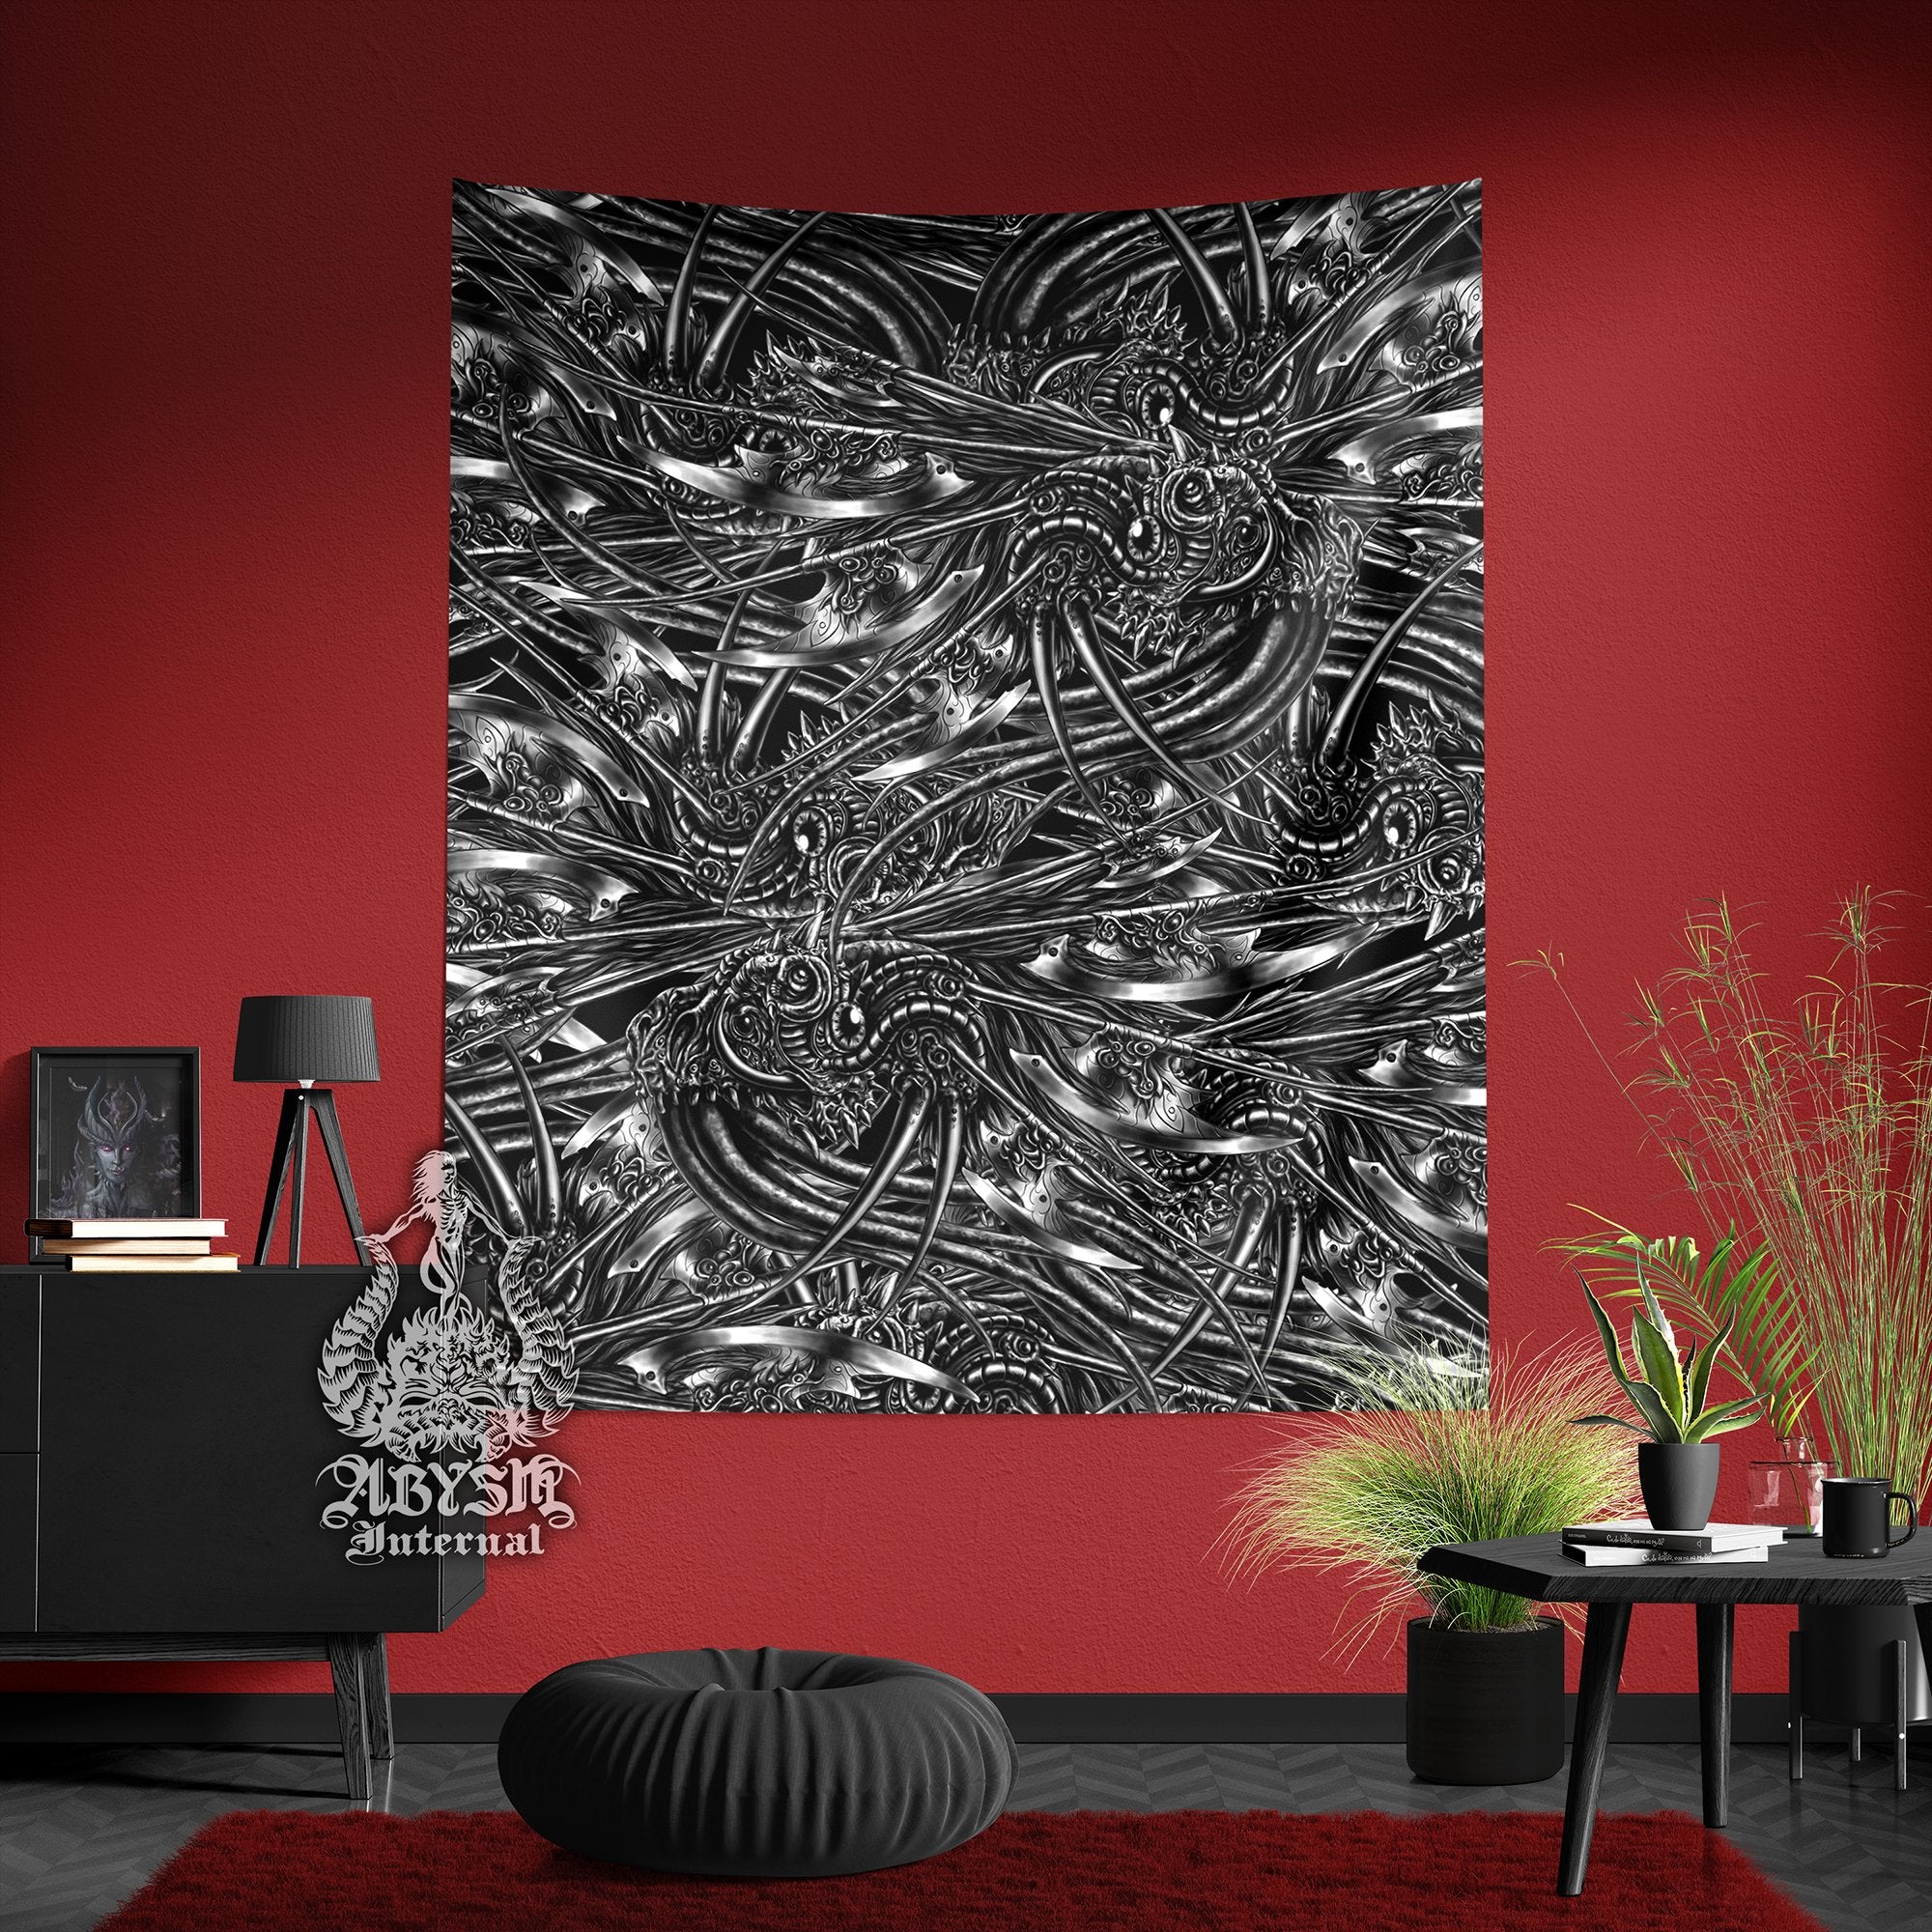 Abstract Goth Art Tapestry, Monster Wall Hanging, Alien Gothic Home Decor, Vertical Art Print - Abysm Internal